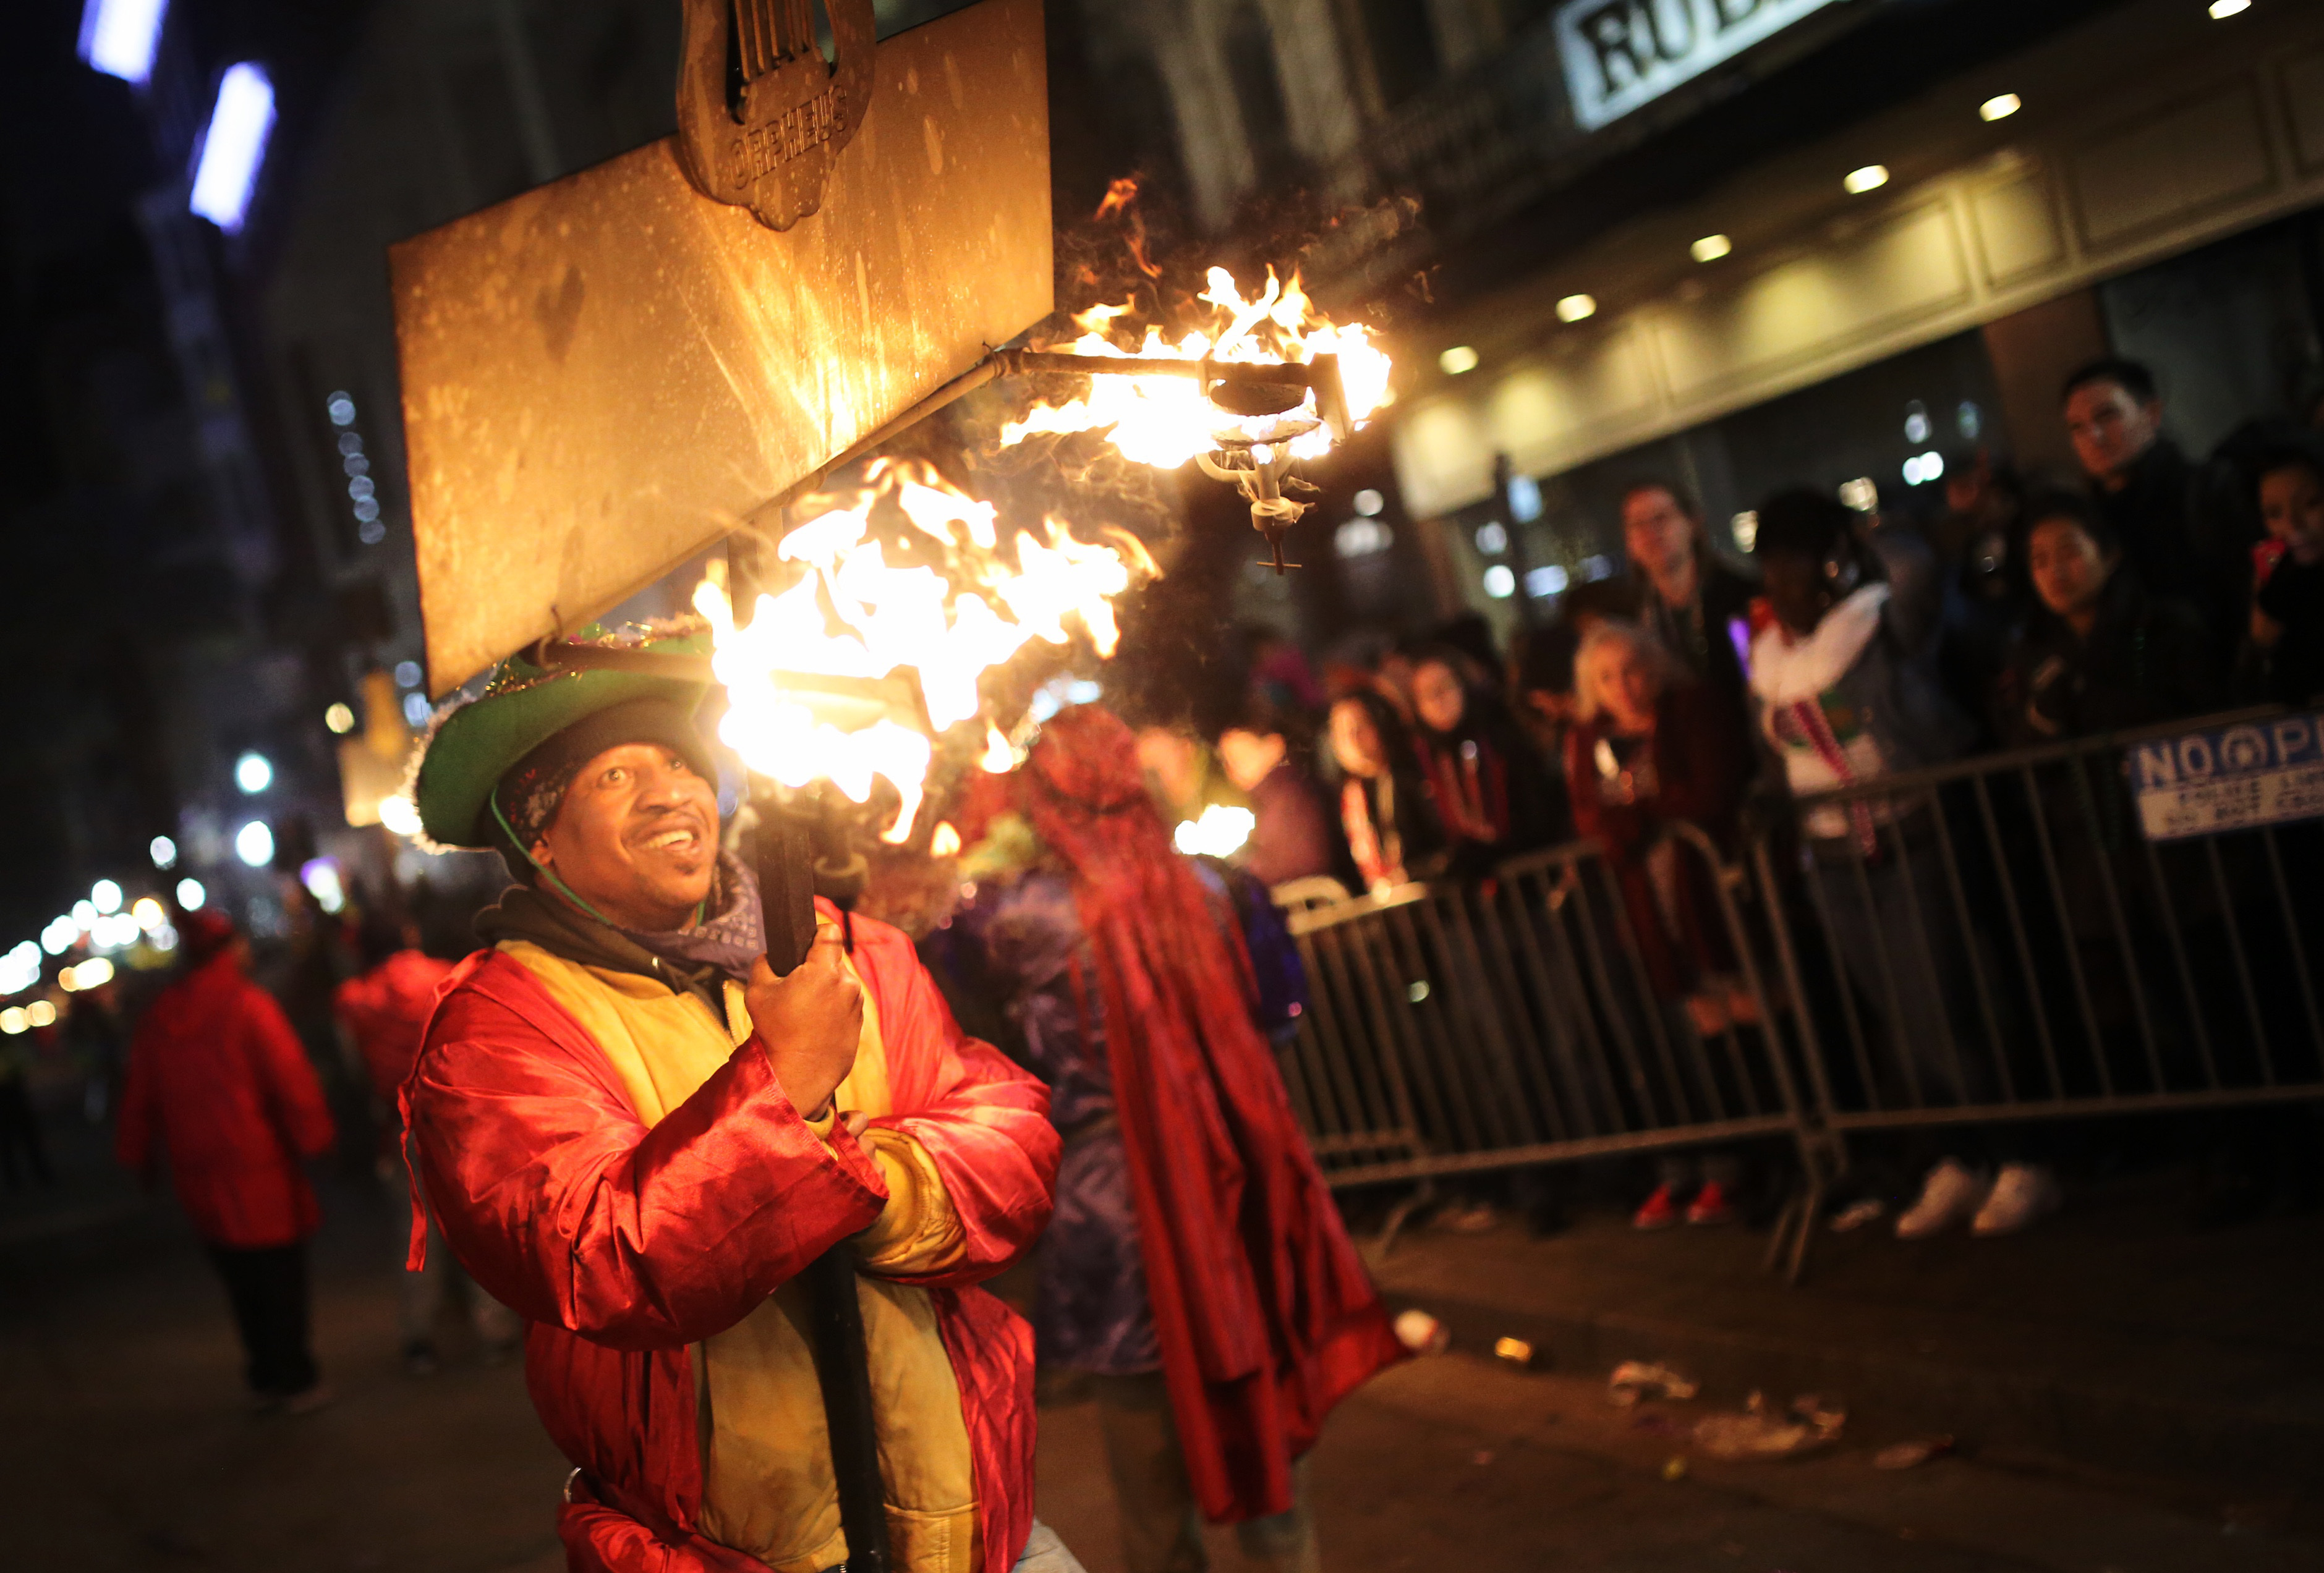 A flambeaux marches Feb. 7 in a parade in New Orleans. The parade took place in advance of Mardi Gras, or Fat Tuesday, which is a time of celebration the day before Ash Wednesday and the beginning of the church's Lenten period. (CNS photo/Dan Anderson, EPA)